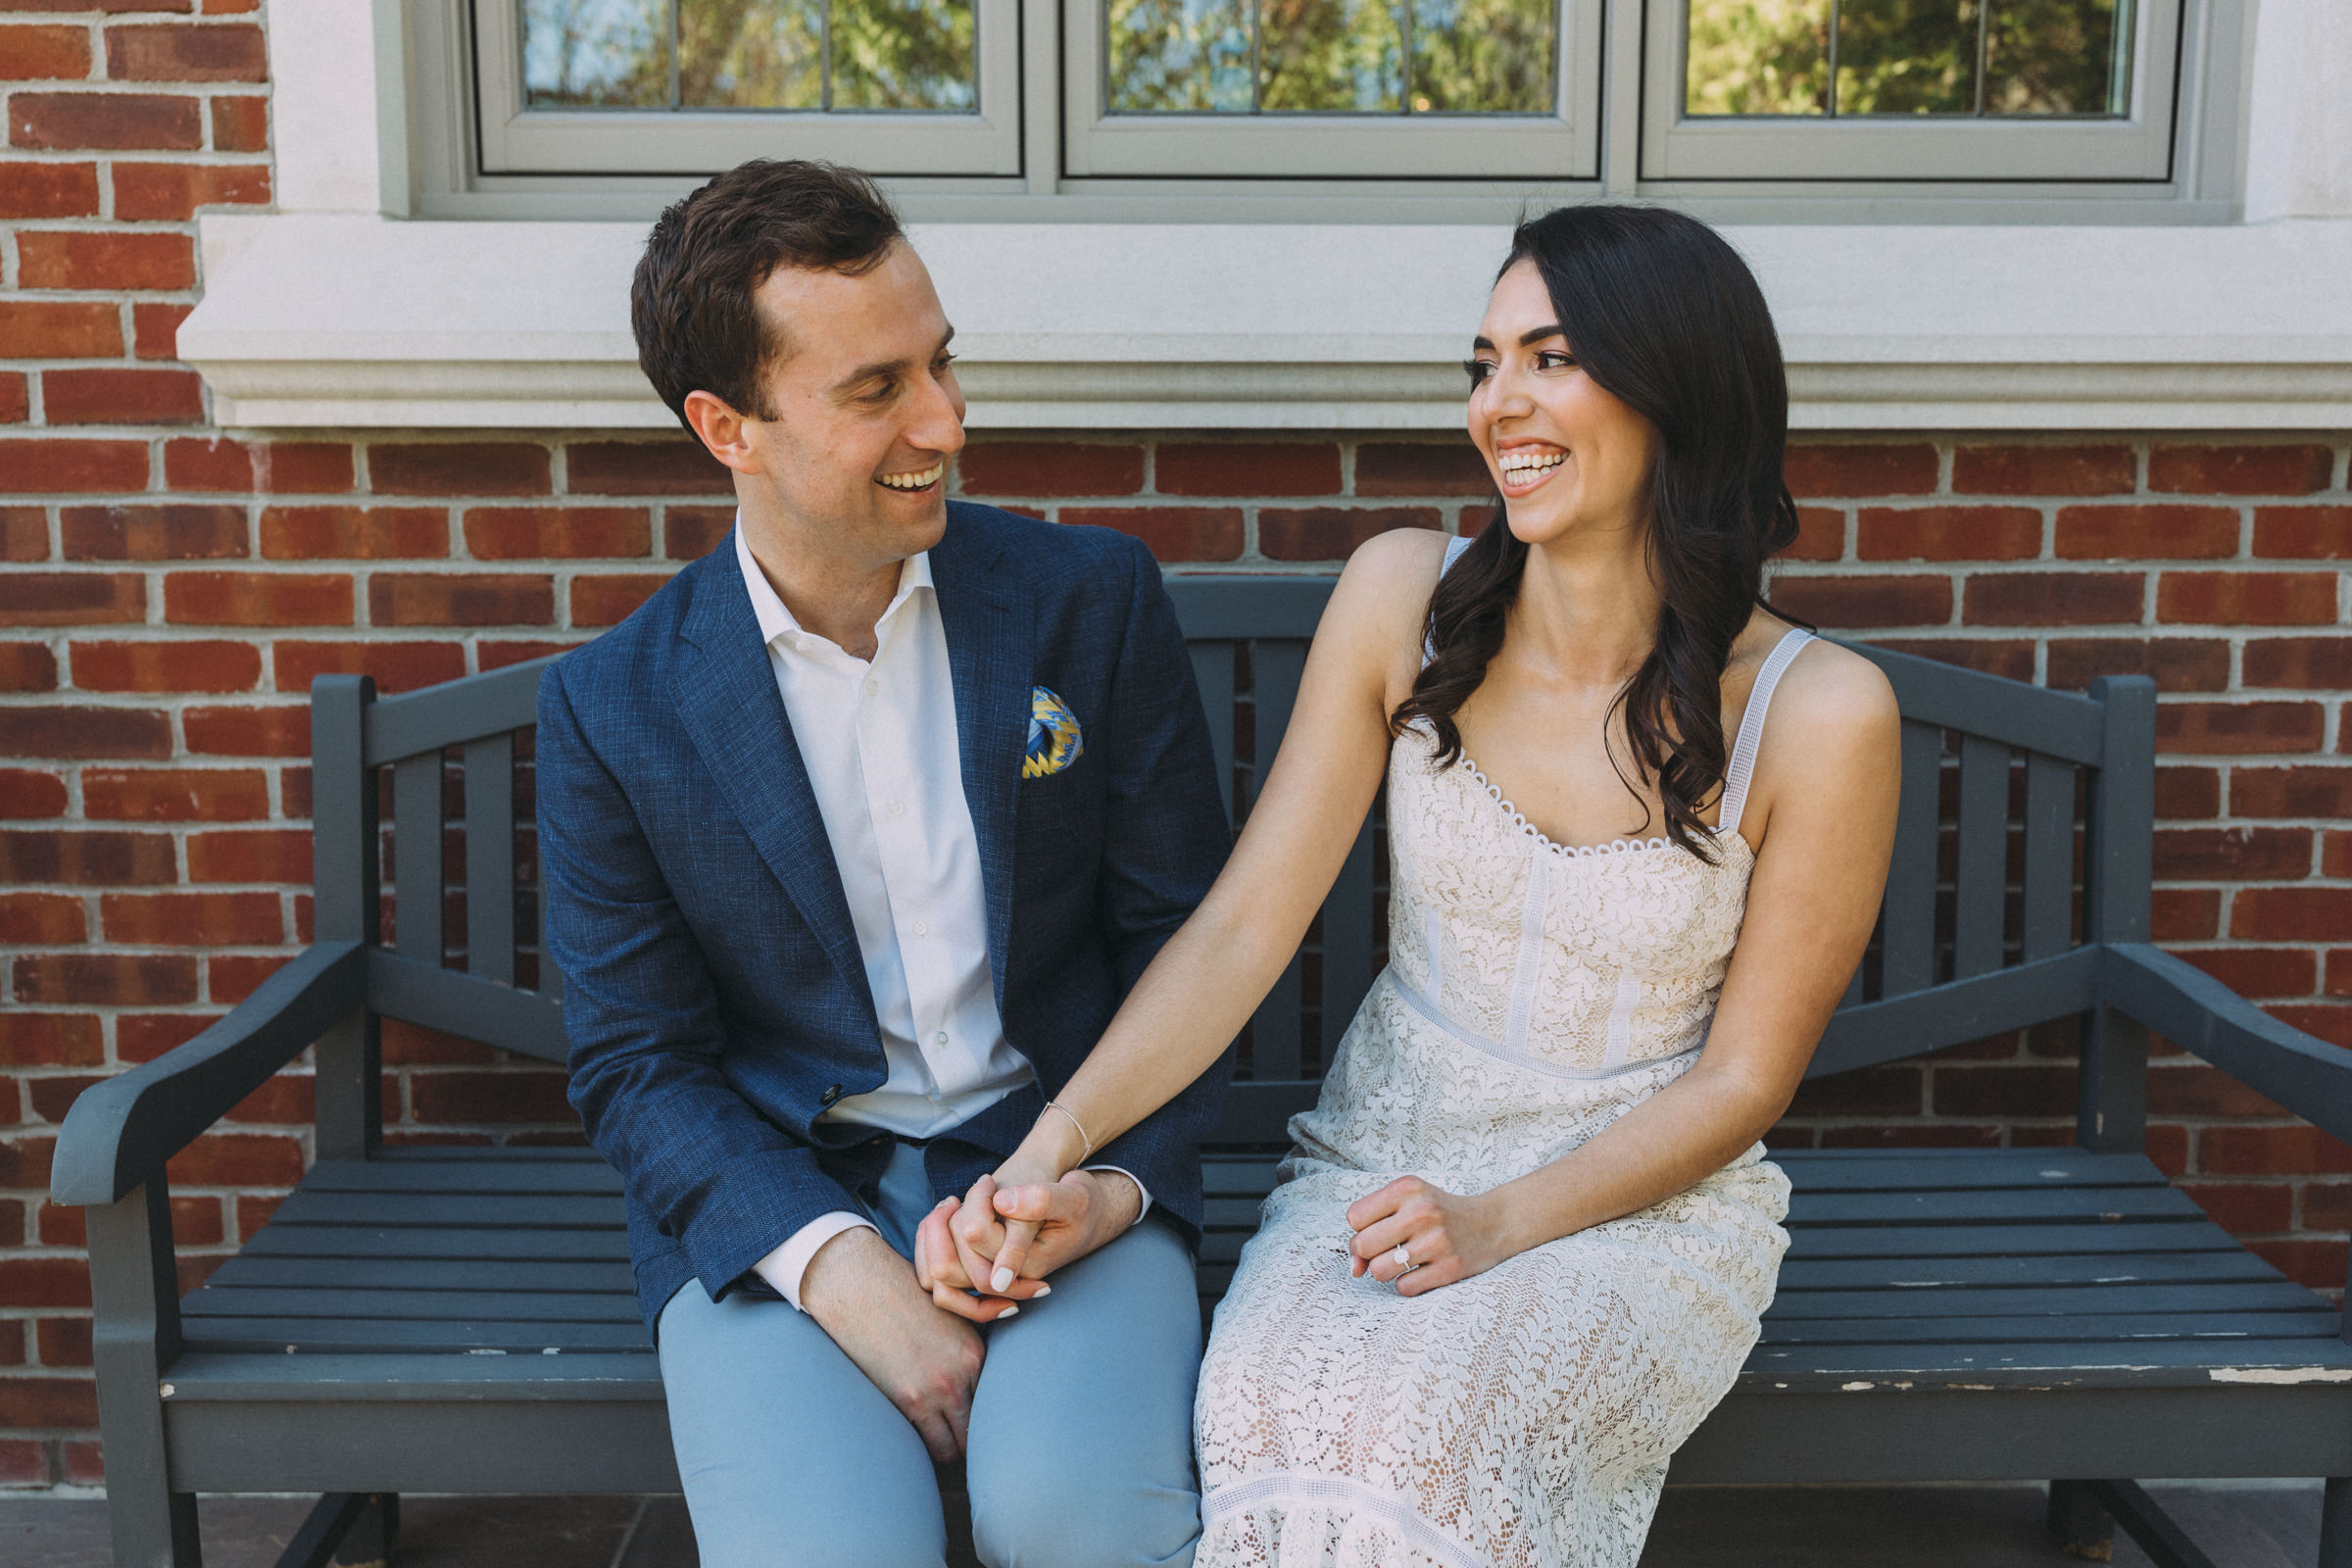 Intimate engagement party Toronto photography